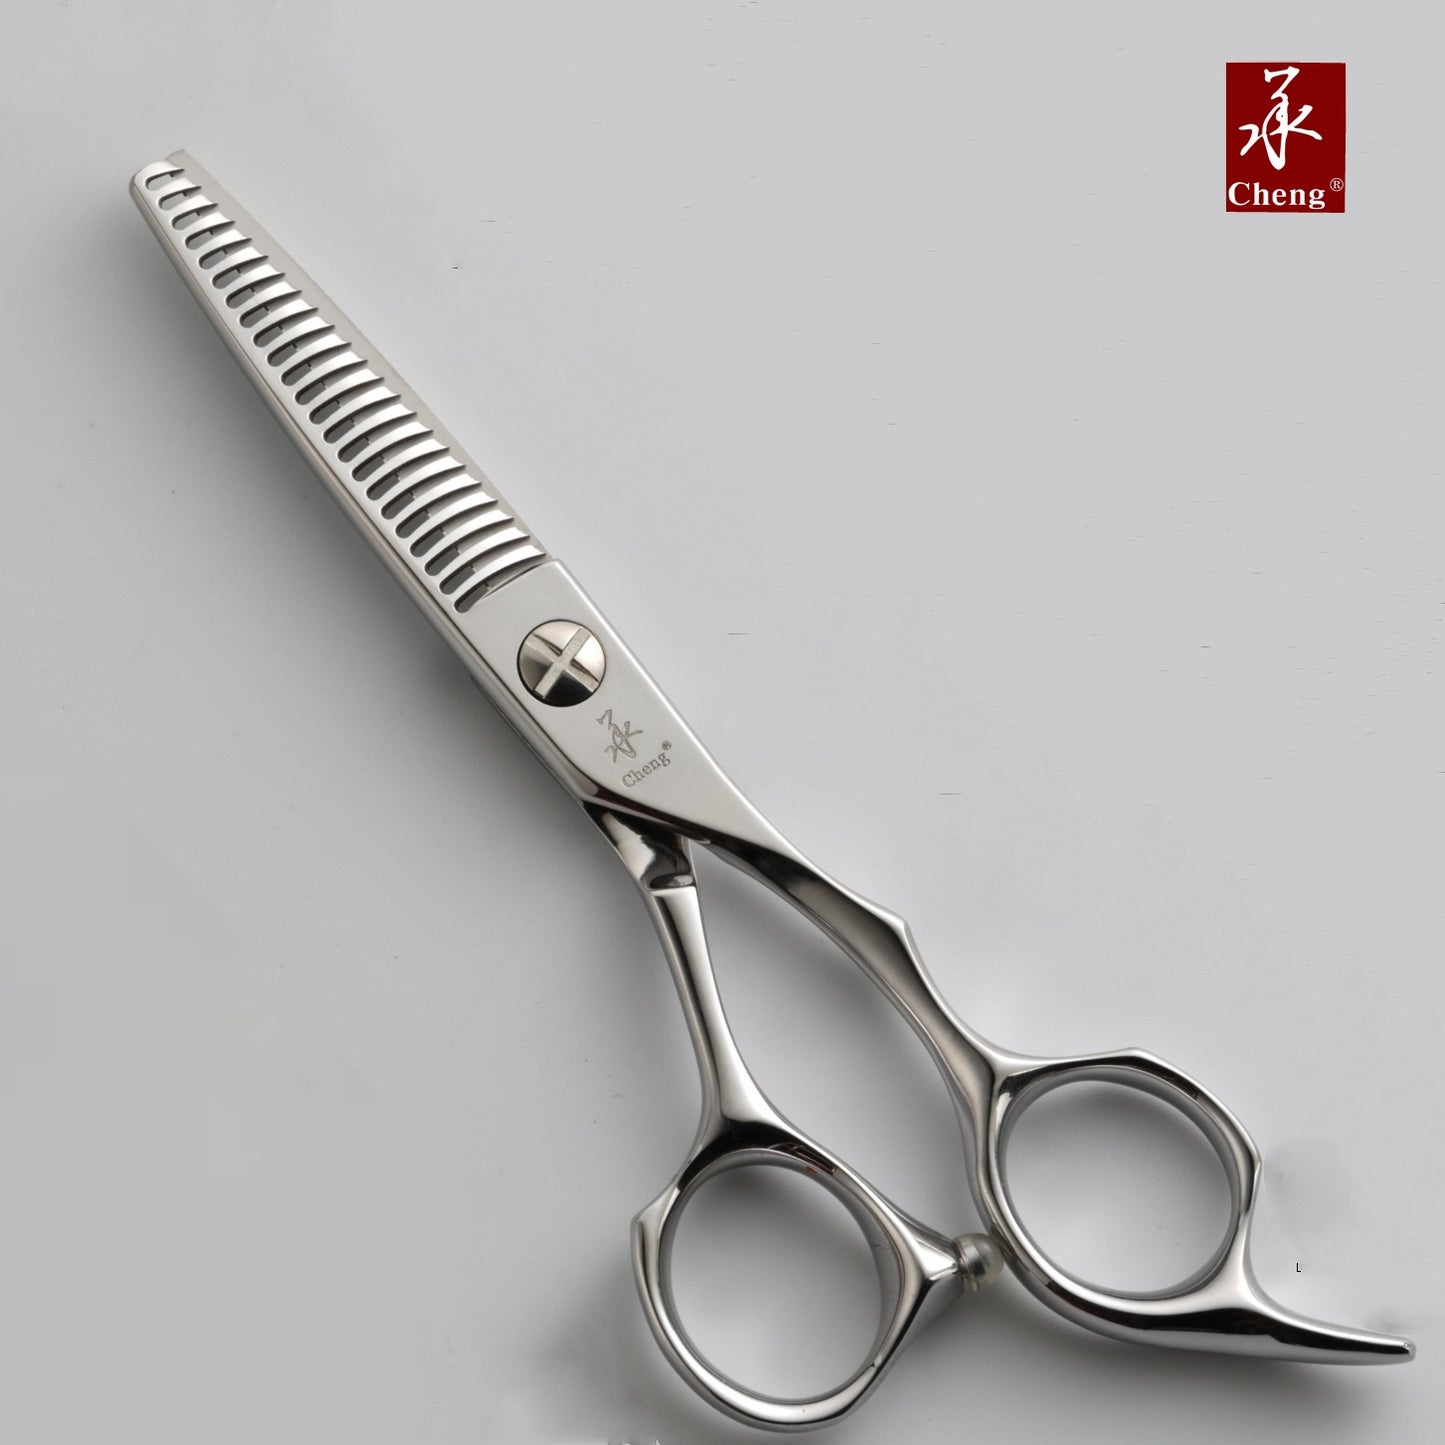 AAD-6.2Z Professional Hair Cutting Scissors 6.2Inch for Cutting